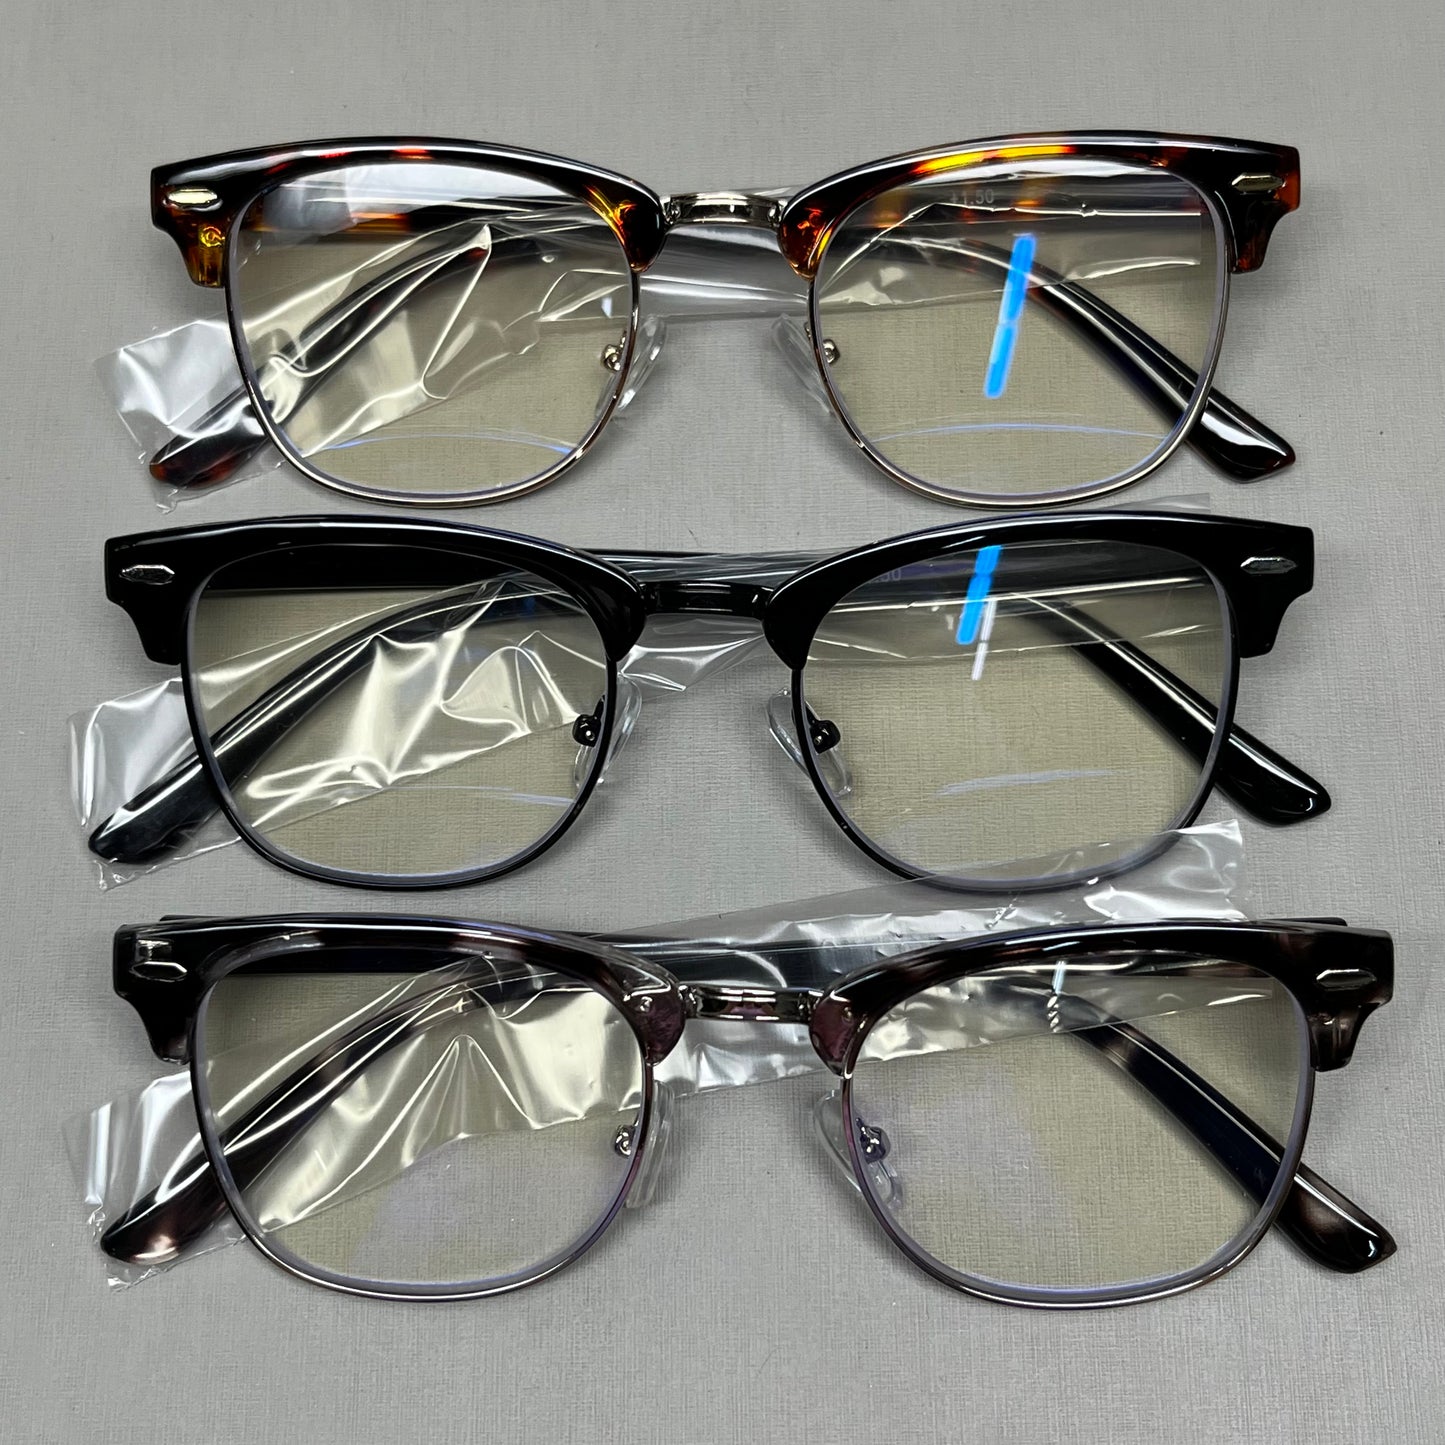 ZXYOO 3 Pack Classic Retro Reading Glasses 1.0x Magnification Strength (New)